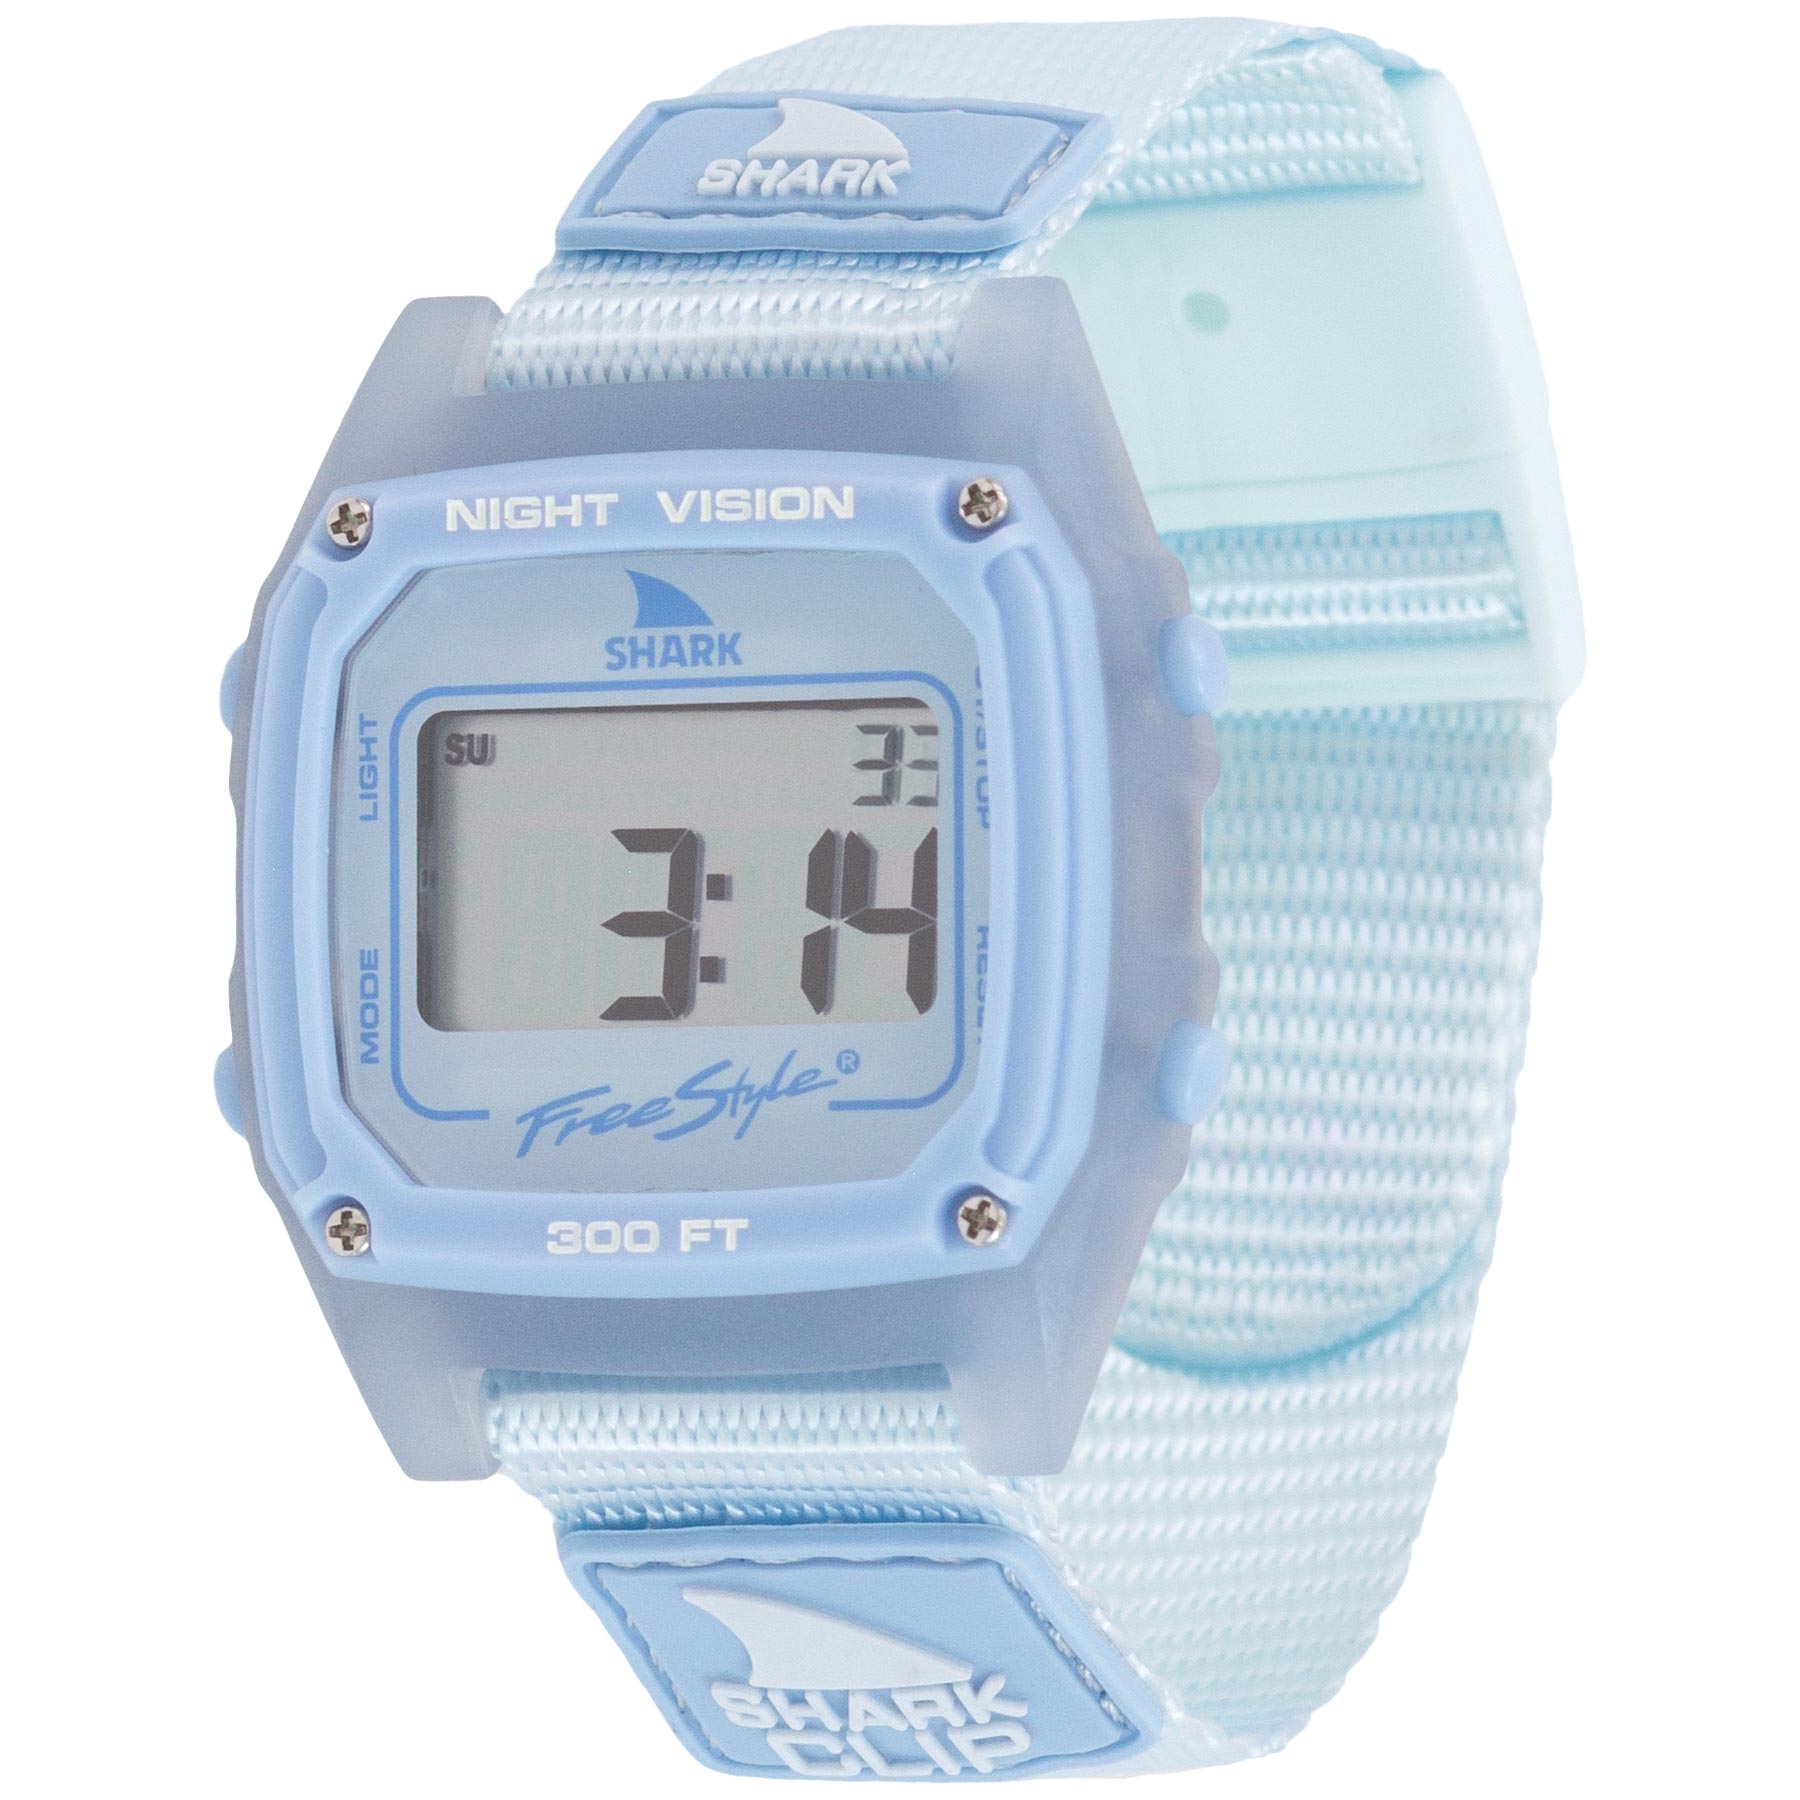 Stores That Sell Shark Watches Sale Online | www.medialit.org